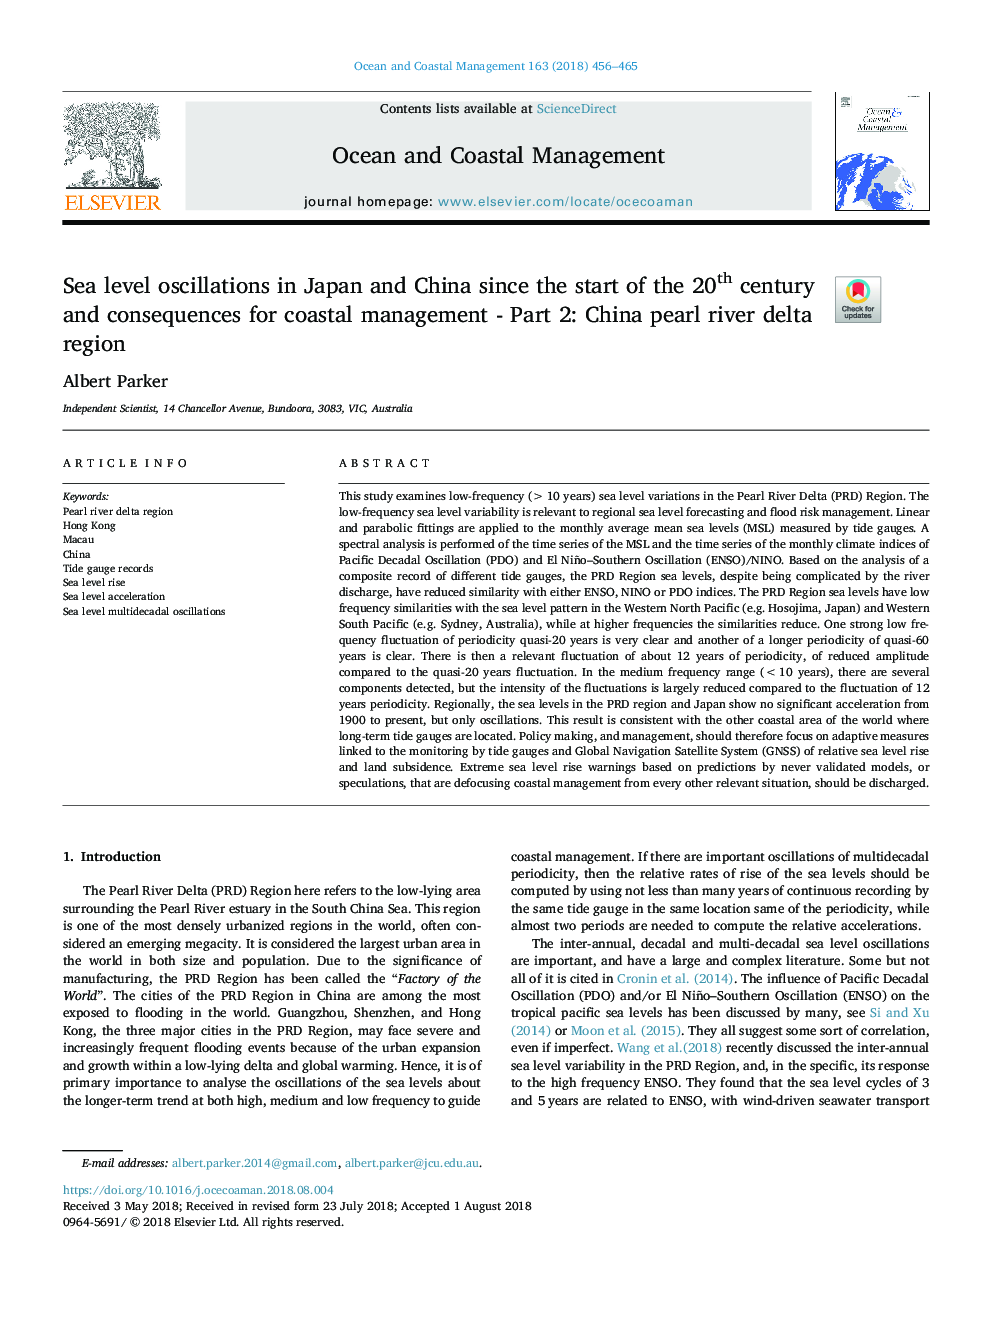 Sea level oscillations in Japan and China since the start of the 20th century and consequences for coastal management - Part 2: China pearl river delta region